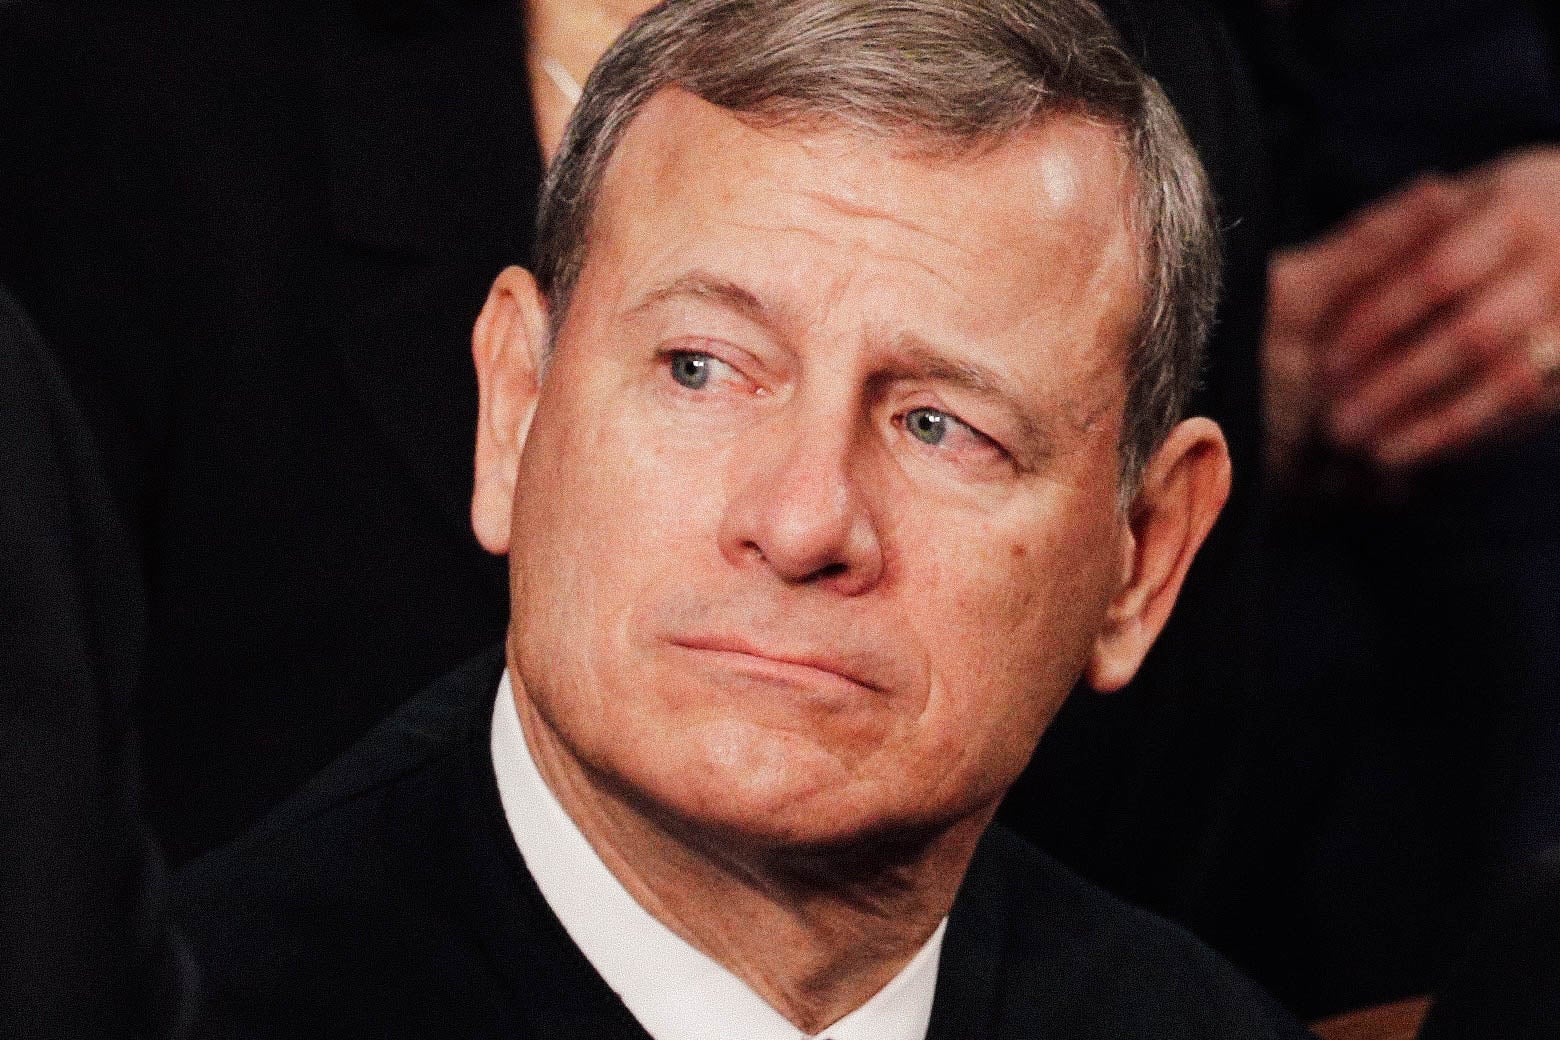 Chief Justice John Roberts looks on during the State of the Union address in the chamber of the House of Representative